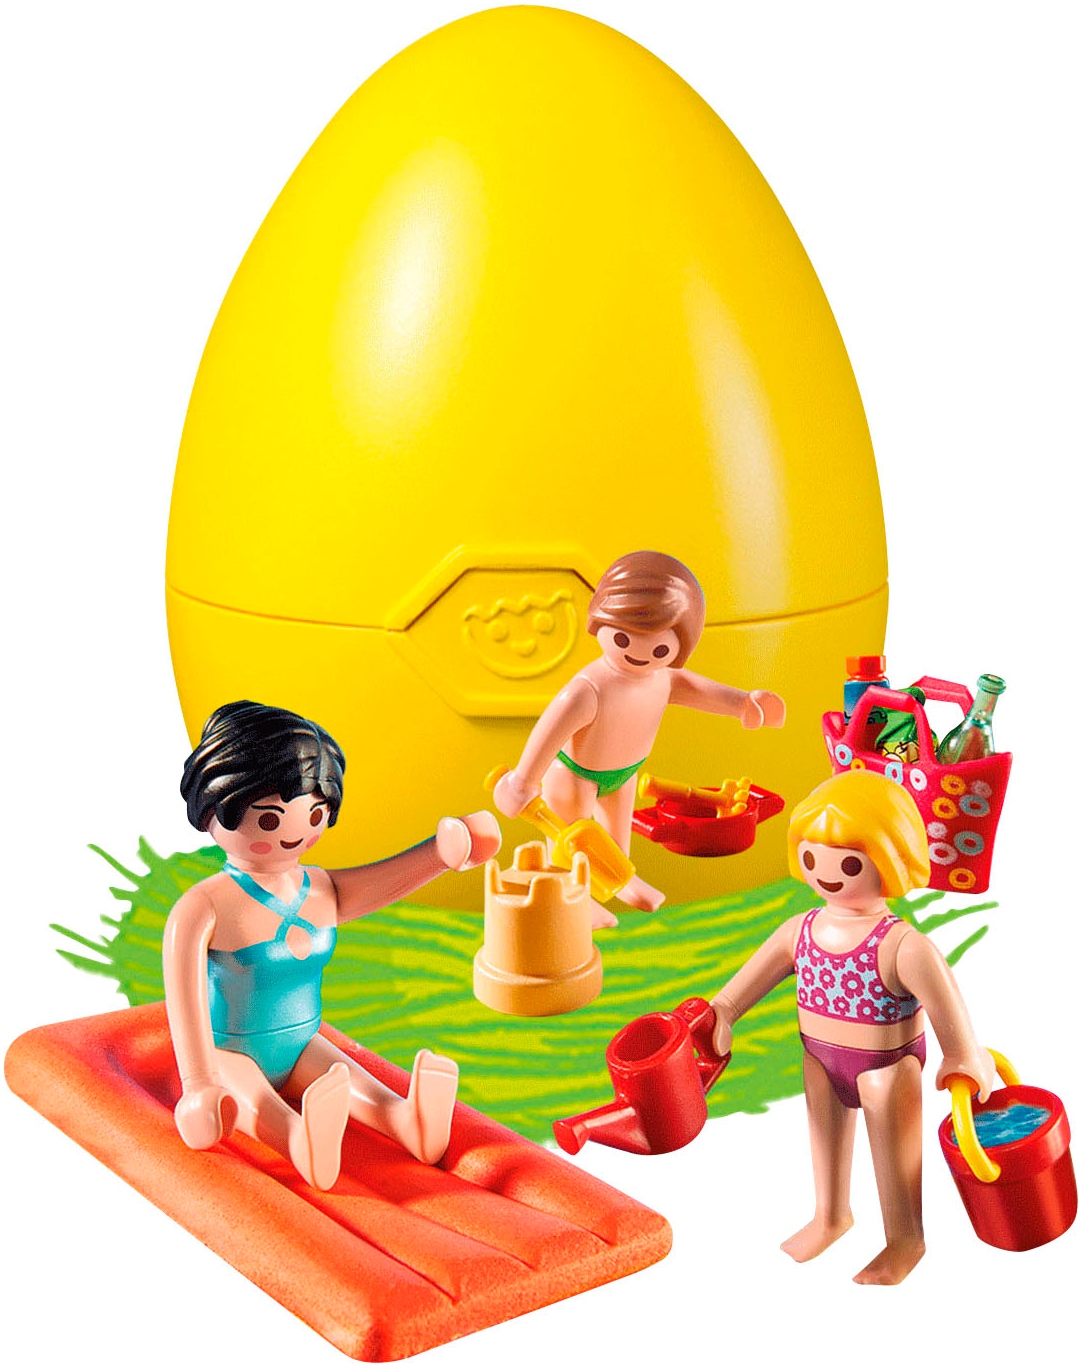 Playmobil® Konstruktions-Spielset »Family Spaß Mama und Kinder (4941), Playmobil«, Made in Europe